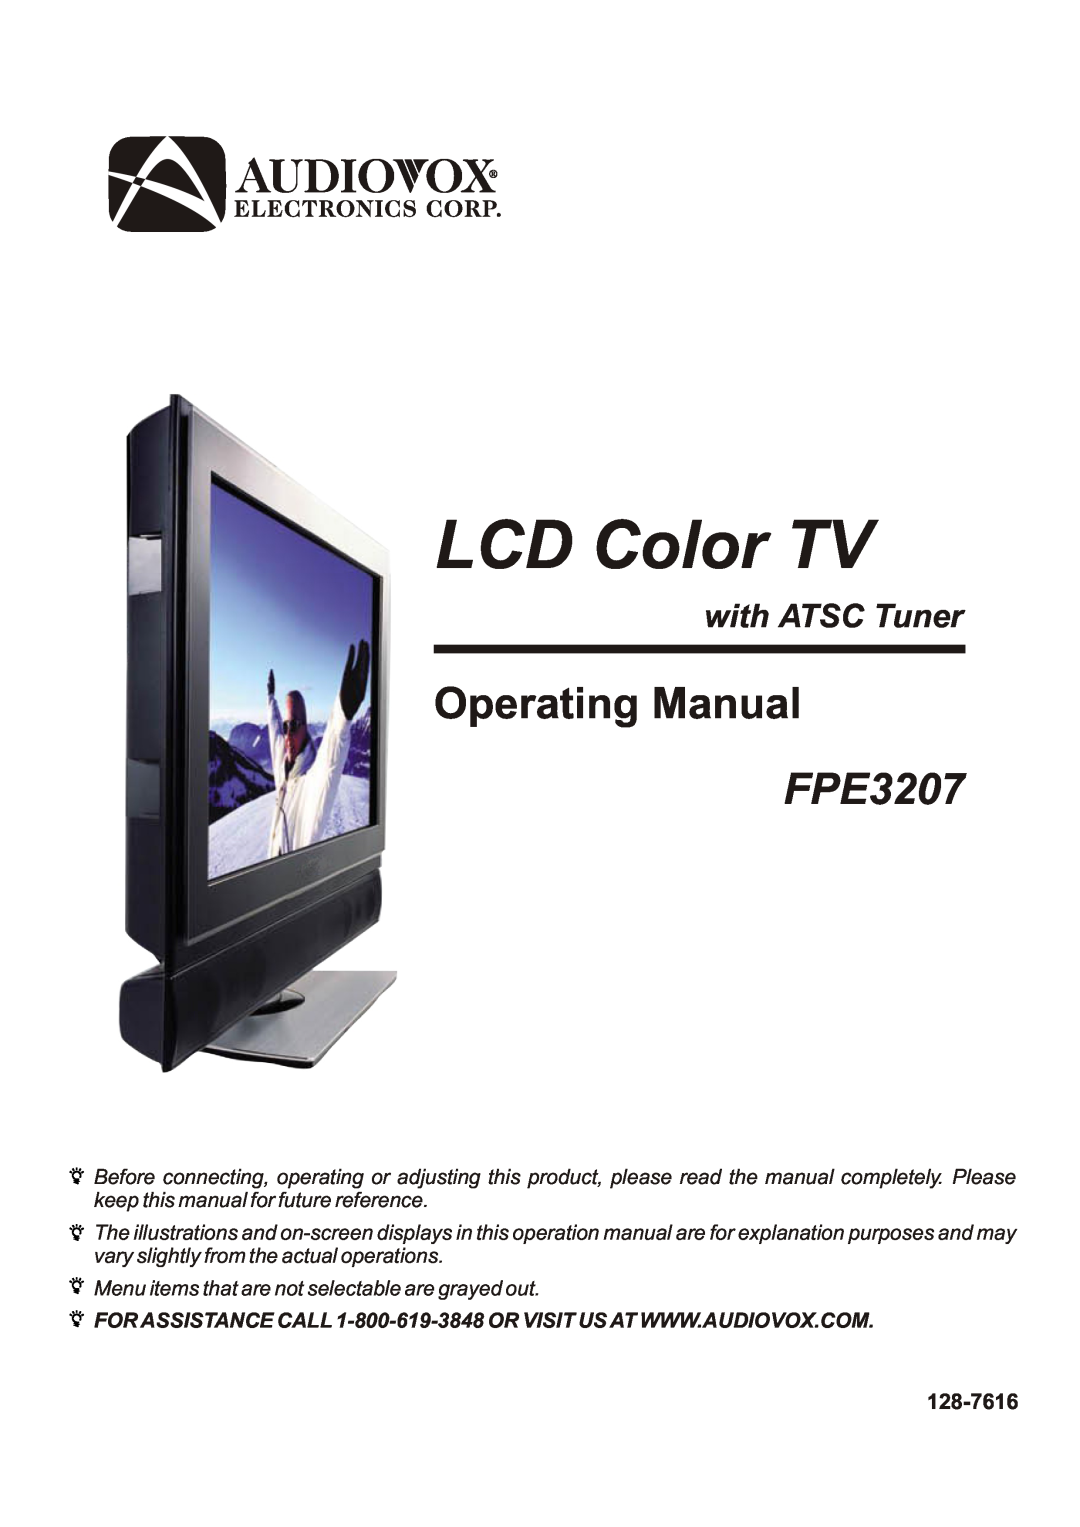 Audiovox FPE3207 operation manual LCD Color TV, Operating Manual, with ATSC Tuner 